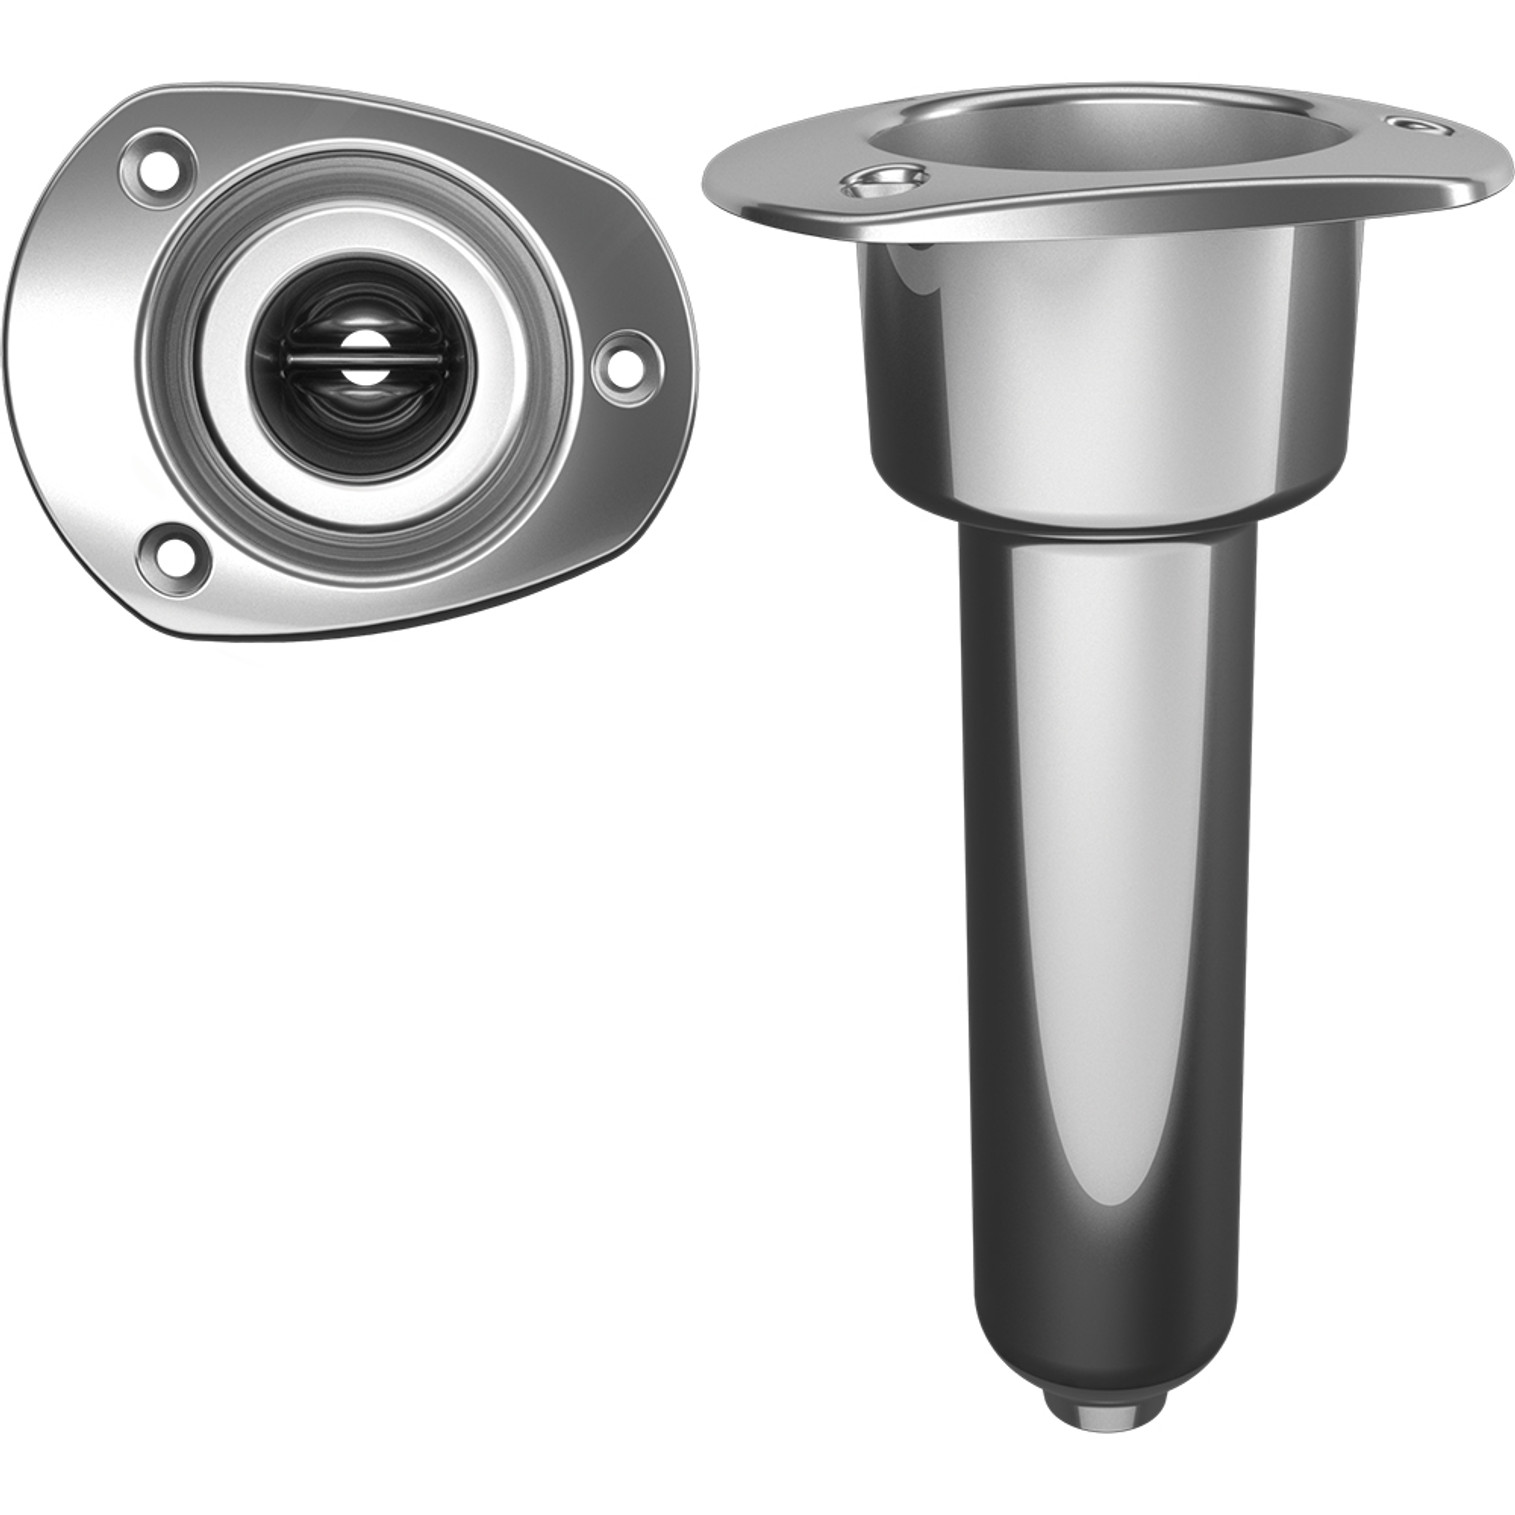 Mate Series Stainless Steel 0 Rod & Cup Holder - Drain - Oval Top